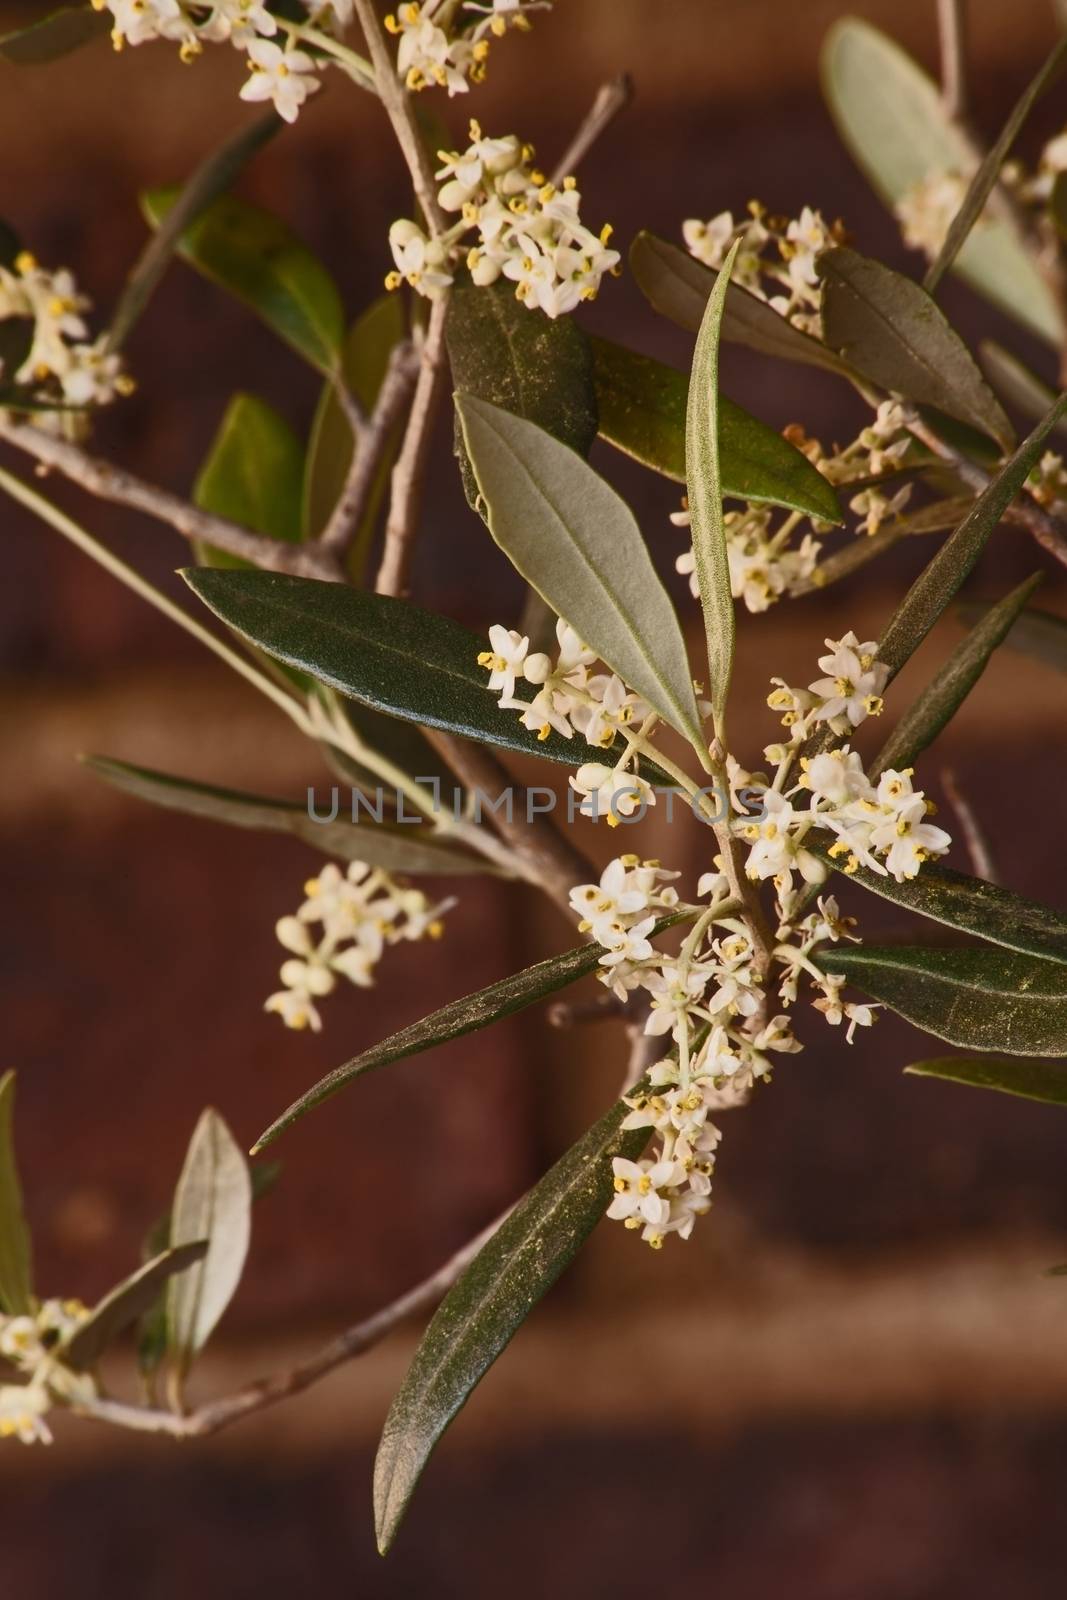 Flowers of the Olive tree Olea europea  10350 by kobus_peche